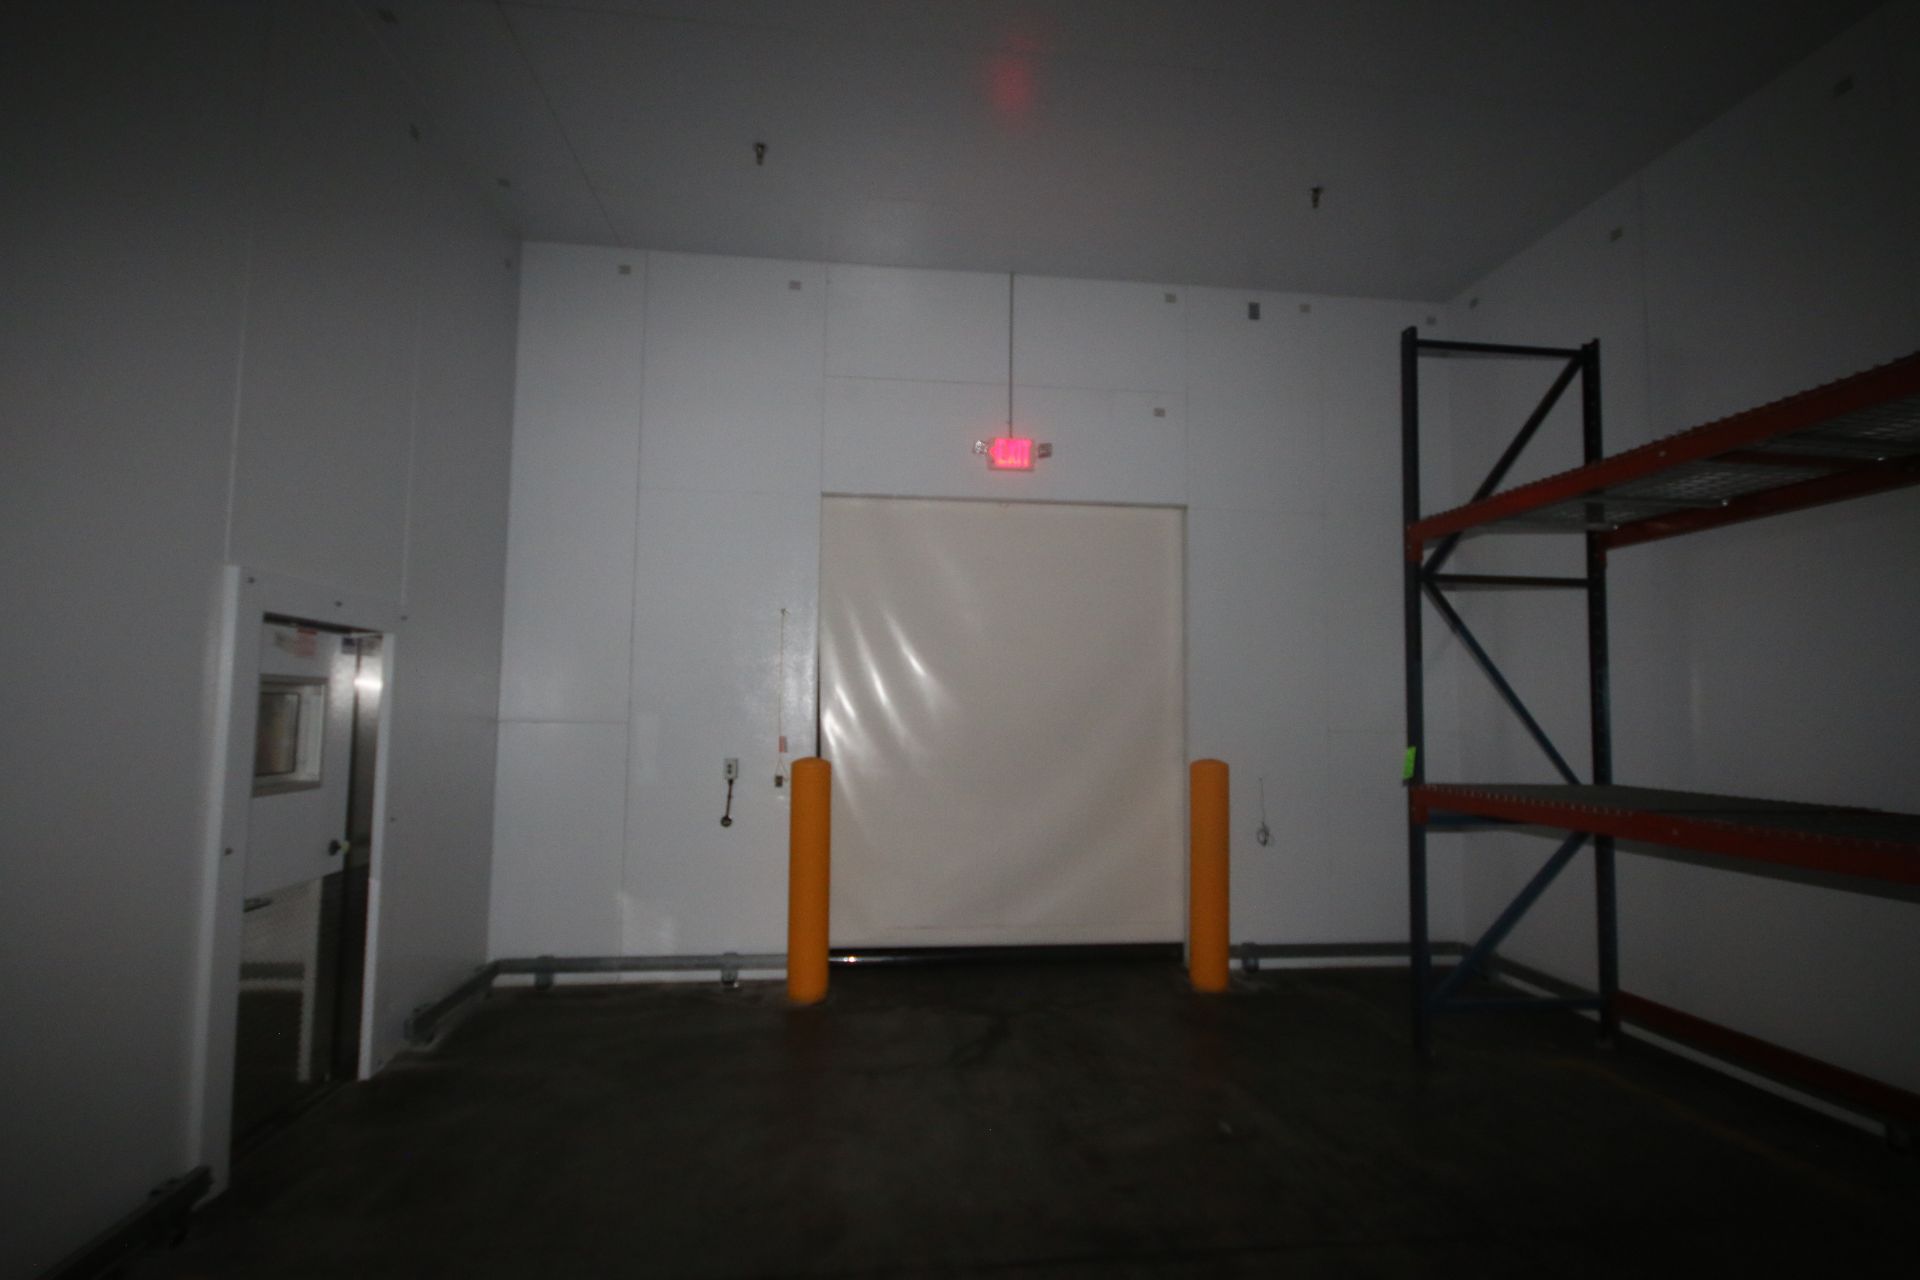 2018 RollSeal Air Tight Drive-Thru Modular Room, Overall Dims.: Aprox. 88' L x 20' W x 190" Tall, - Image 10 of 24